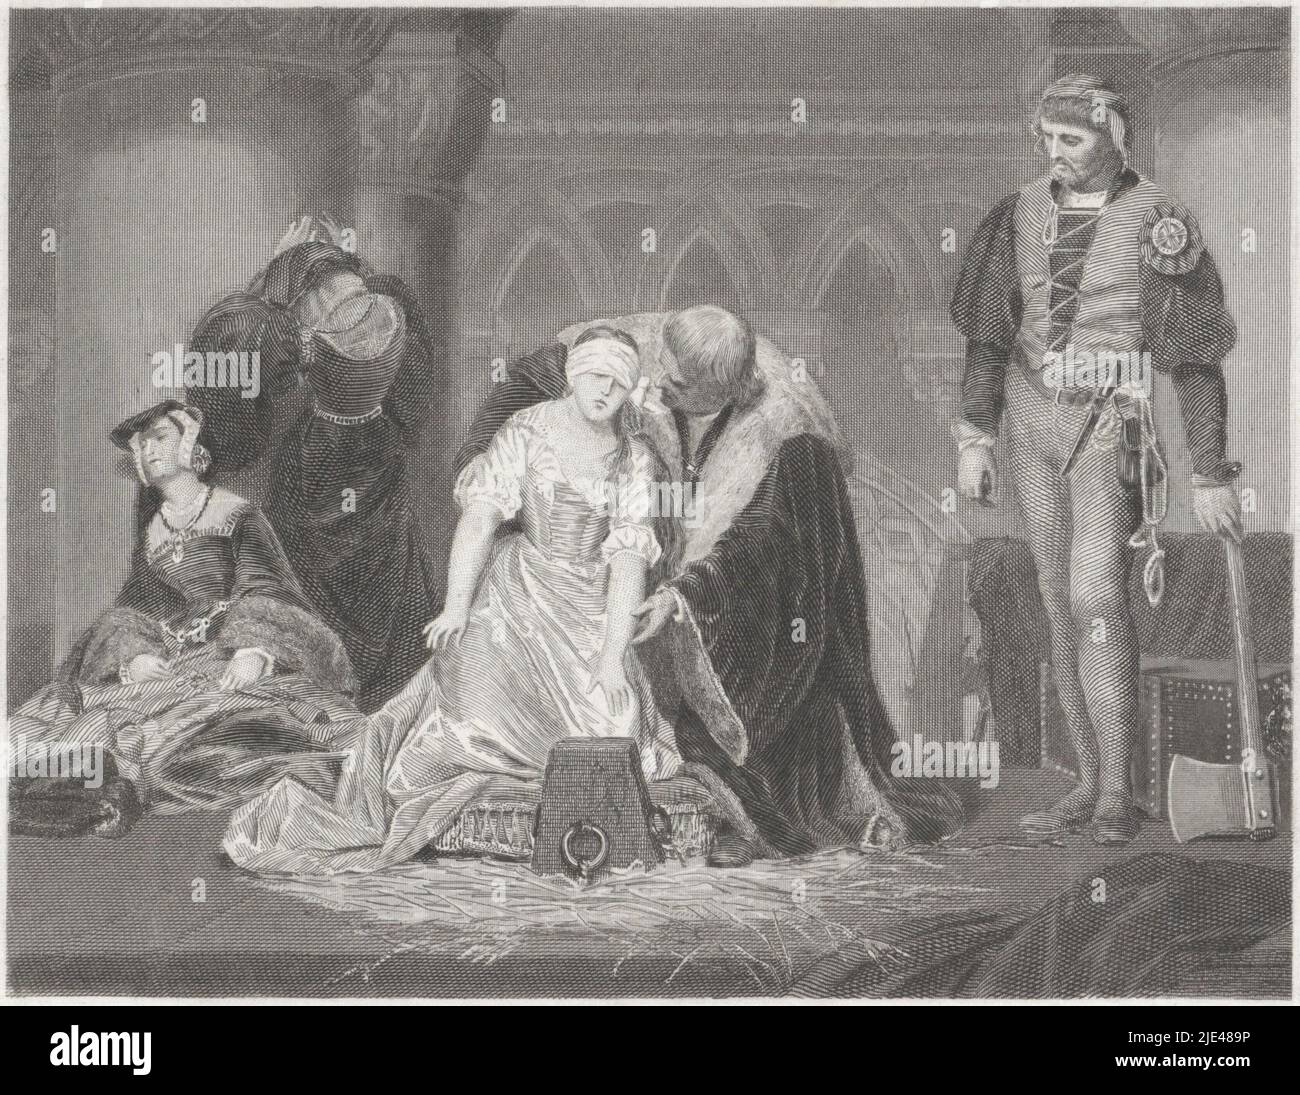 The execution of Lady Jane Grey, Dirk Jurriaan Sluyter (possibly), after Paul Delaroche, 1833 - 1886, Lady Jane Grey is on her knees on a cushion. She is blindfolded and groping forward with her hands. In front of her is a chopping block. A man wearing a rich, fur-trimmed cloak bends over her. Next to her, the executioner stands ready with an axe. In the background two weeping women., print maker: Dirk Jurriaan Sluyter, (possibly), print maker: Christiaan Lodewijk van Kesteren, (possibly), after: Paul Delaroche, Amsterdam, 1833 - 1886, paper, etching, engraving, h 126 mm × w 177 mm Stock Photo